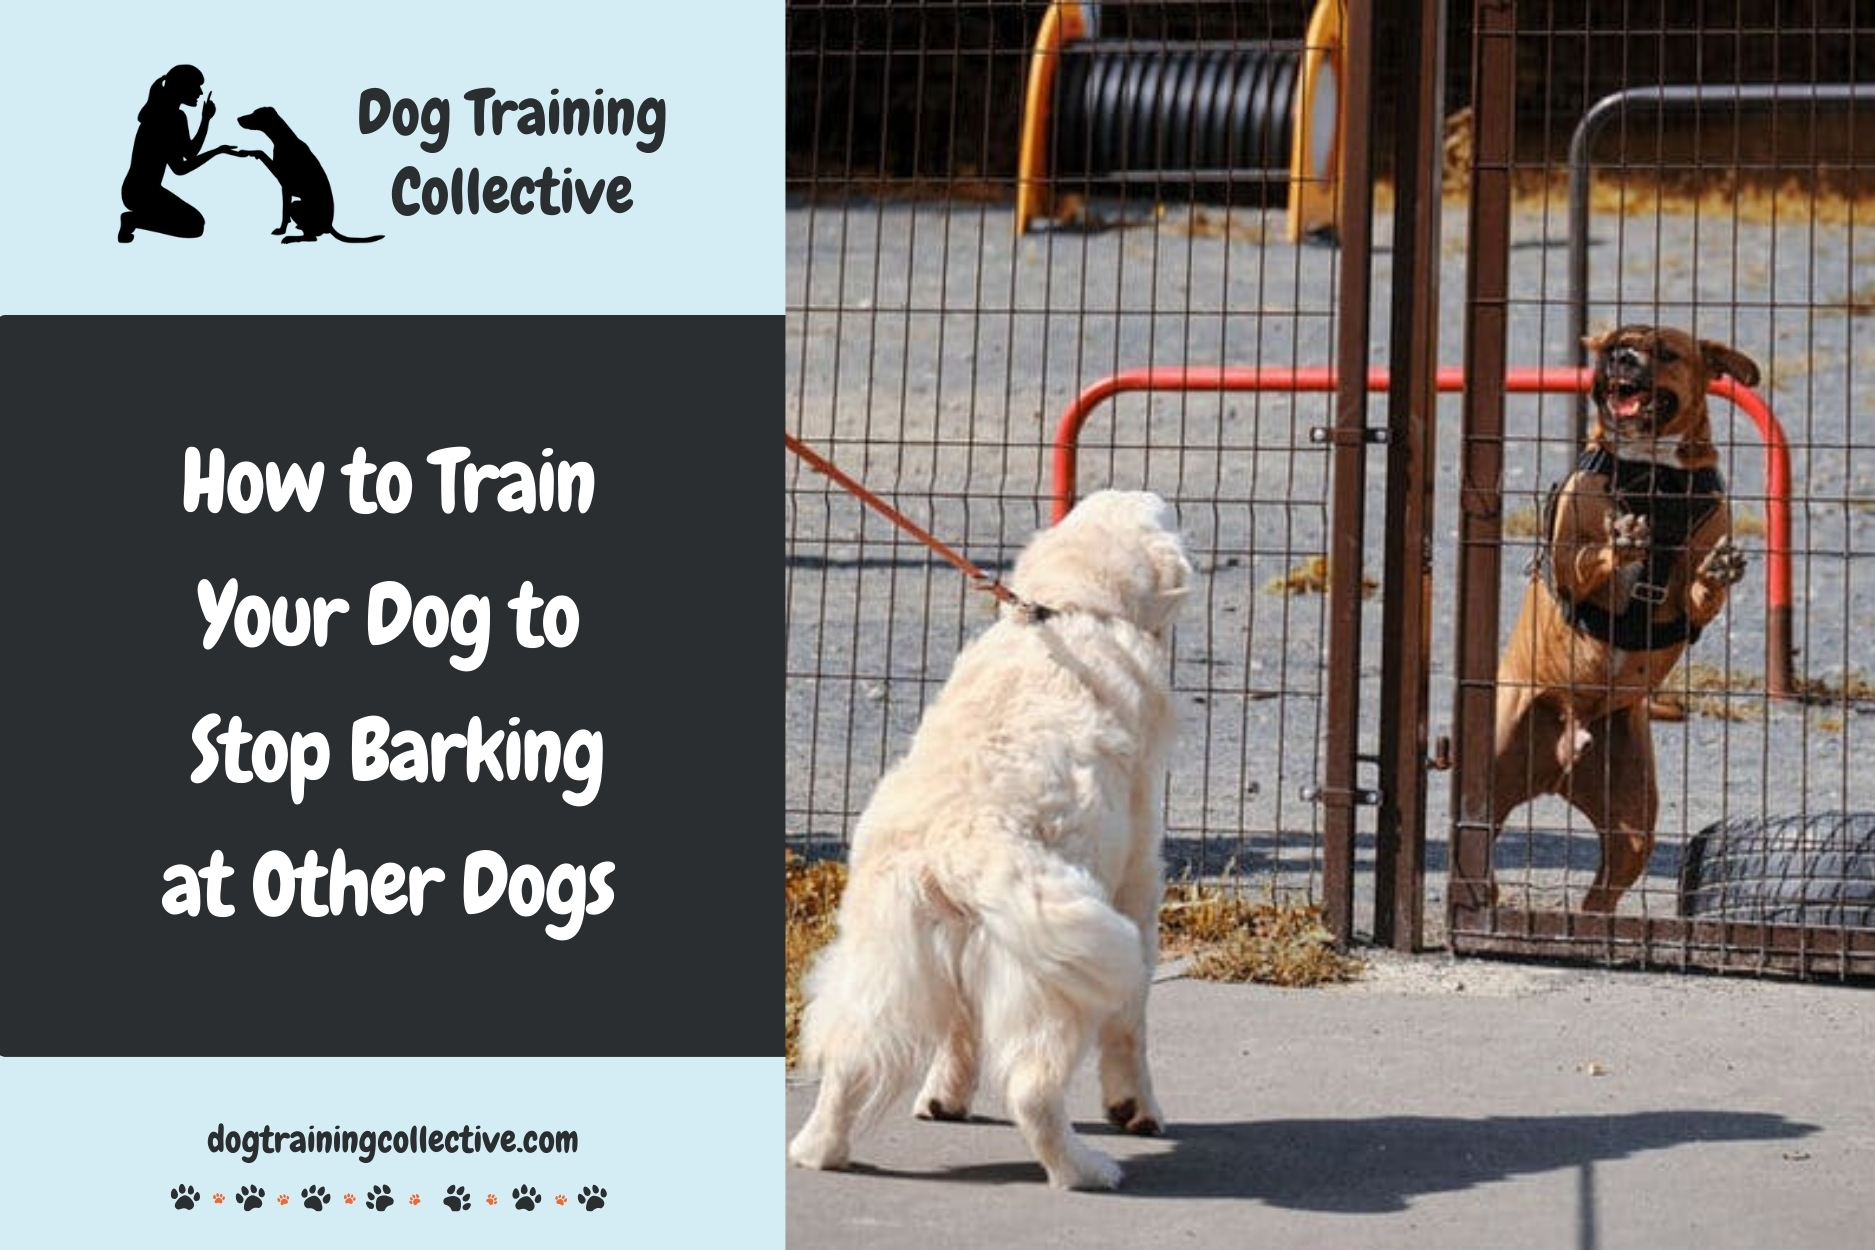 How to Train Your Dog to Stop Barking at Other Dogs